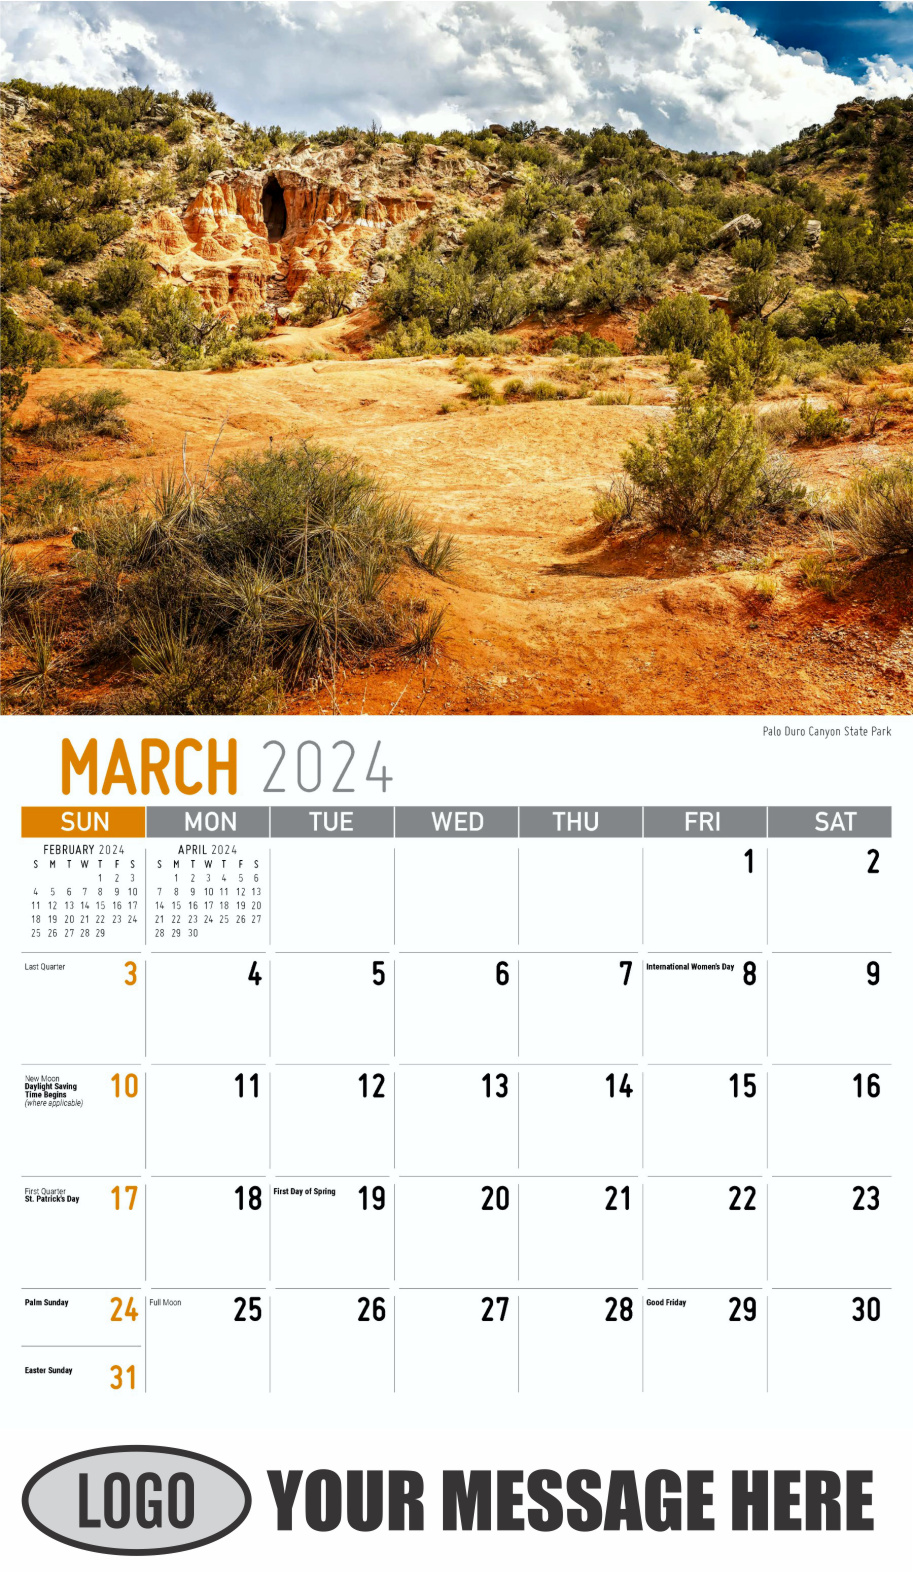 Scenes of Texas 2024 Business Advertising Calendar - March